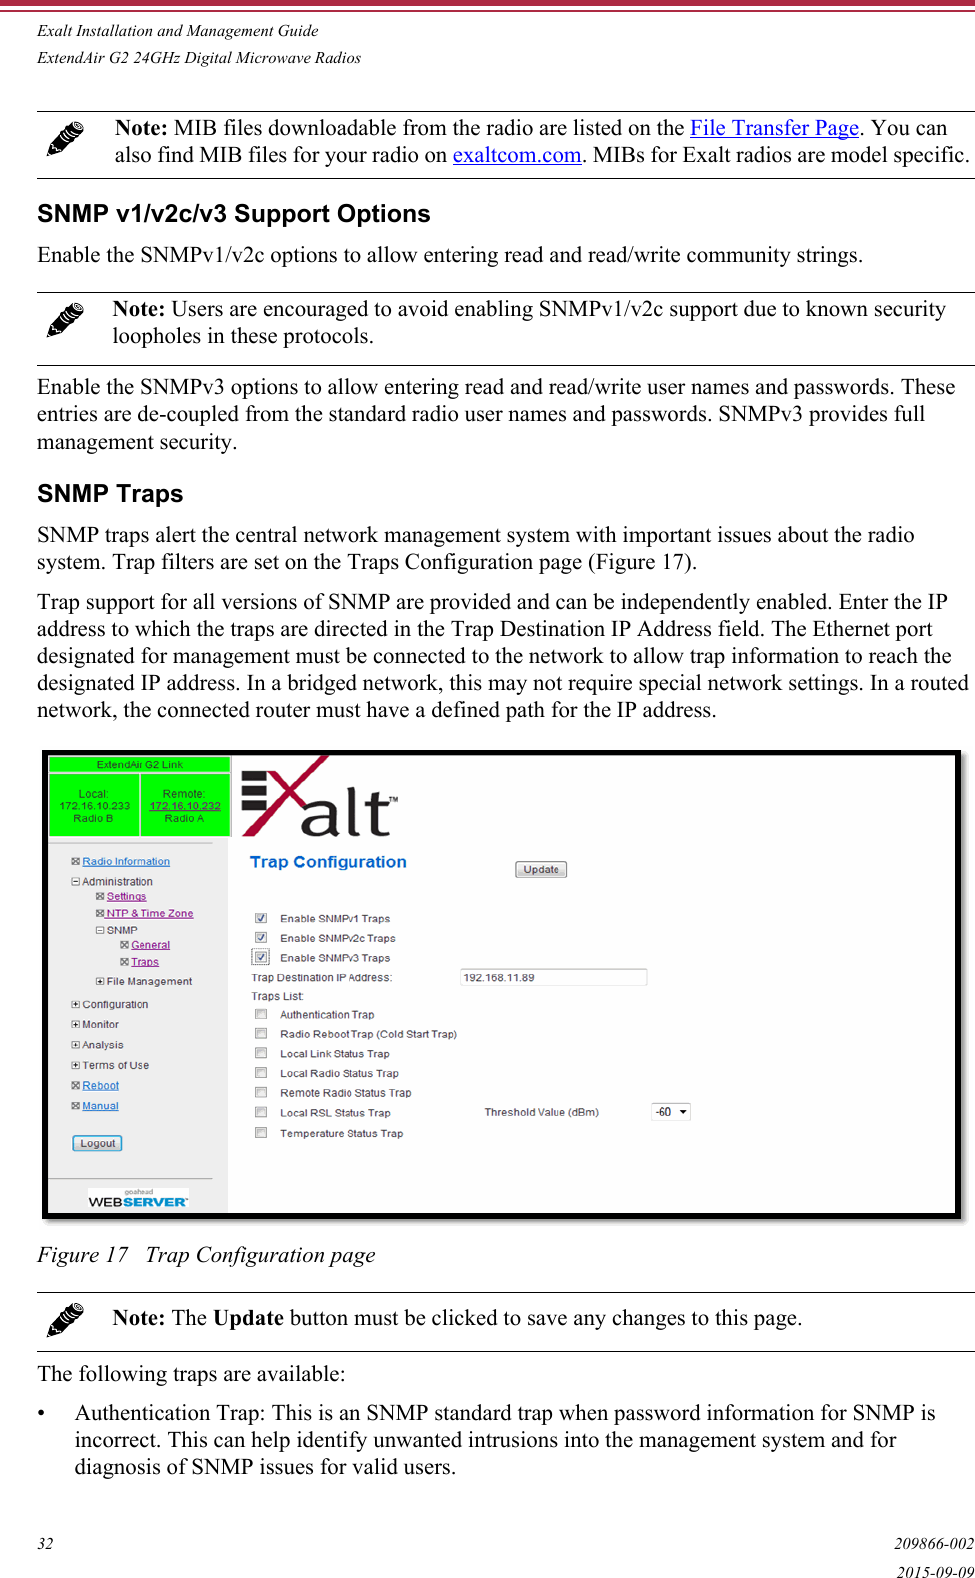 Exalt Installation and Management GuideExtendAir G2 24GHz Digital Microwave Radios32 209866-0022015-09-09SNMP v1/v2c/v3 Support OptionsEnable the SNMPv1/v2c options to allow entering read and read/write community strings. Enable the SNMPv3 options to allow entering read and read/write user names and passwords. These entries are de-coupled from the standard radio user names and passwords. SNMPv3 provides full management security.SNMP TrapsSNMP traps alert the central network management system with important issues about the radio system. Trap filters are set on the Traps Configuration page (Figure 17). Trap support for all versions of SNMP are provided and can be independently enabled. Enter the IP address to which the traps are directed in the Trap Destination IP Address field. The Ethernet port designated for management must be connected to the network to allow trap information to reach the designated IP address. In a bridged network, this may not require special network settings. In a routed network, the connected router must have a defined path for the IP address.Figure 17   Trap Configuration pageThe following traps are available:• Authentication Trap: This is an SNMP standard trap when password information for SNMP is incorrect. This can help identify unwanted intrusions into the management system and for diagnosis of SNMP issues for valid users.Note: MIB files downloadable from the radio are listed on the File Transfer Page. You can also find MIB files for your radio on exaltcom.com. MIBs for Exalt radios are model specific.Note: Users are encouraged to avoid enabling SNMPv1/v2c support due to known security loopholes in these protocols.Note: The Update button must be clicked to save any changes to this page.